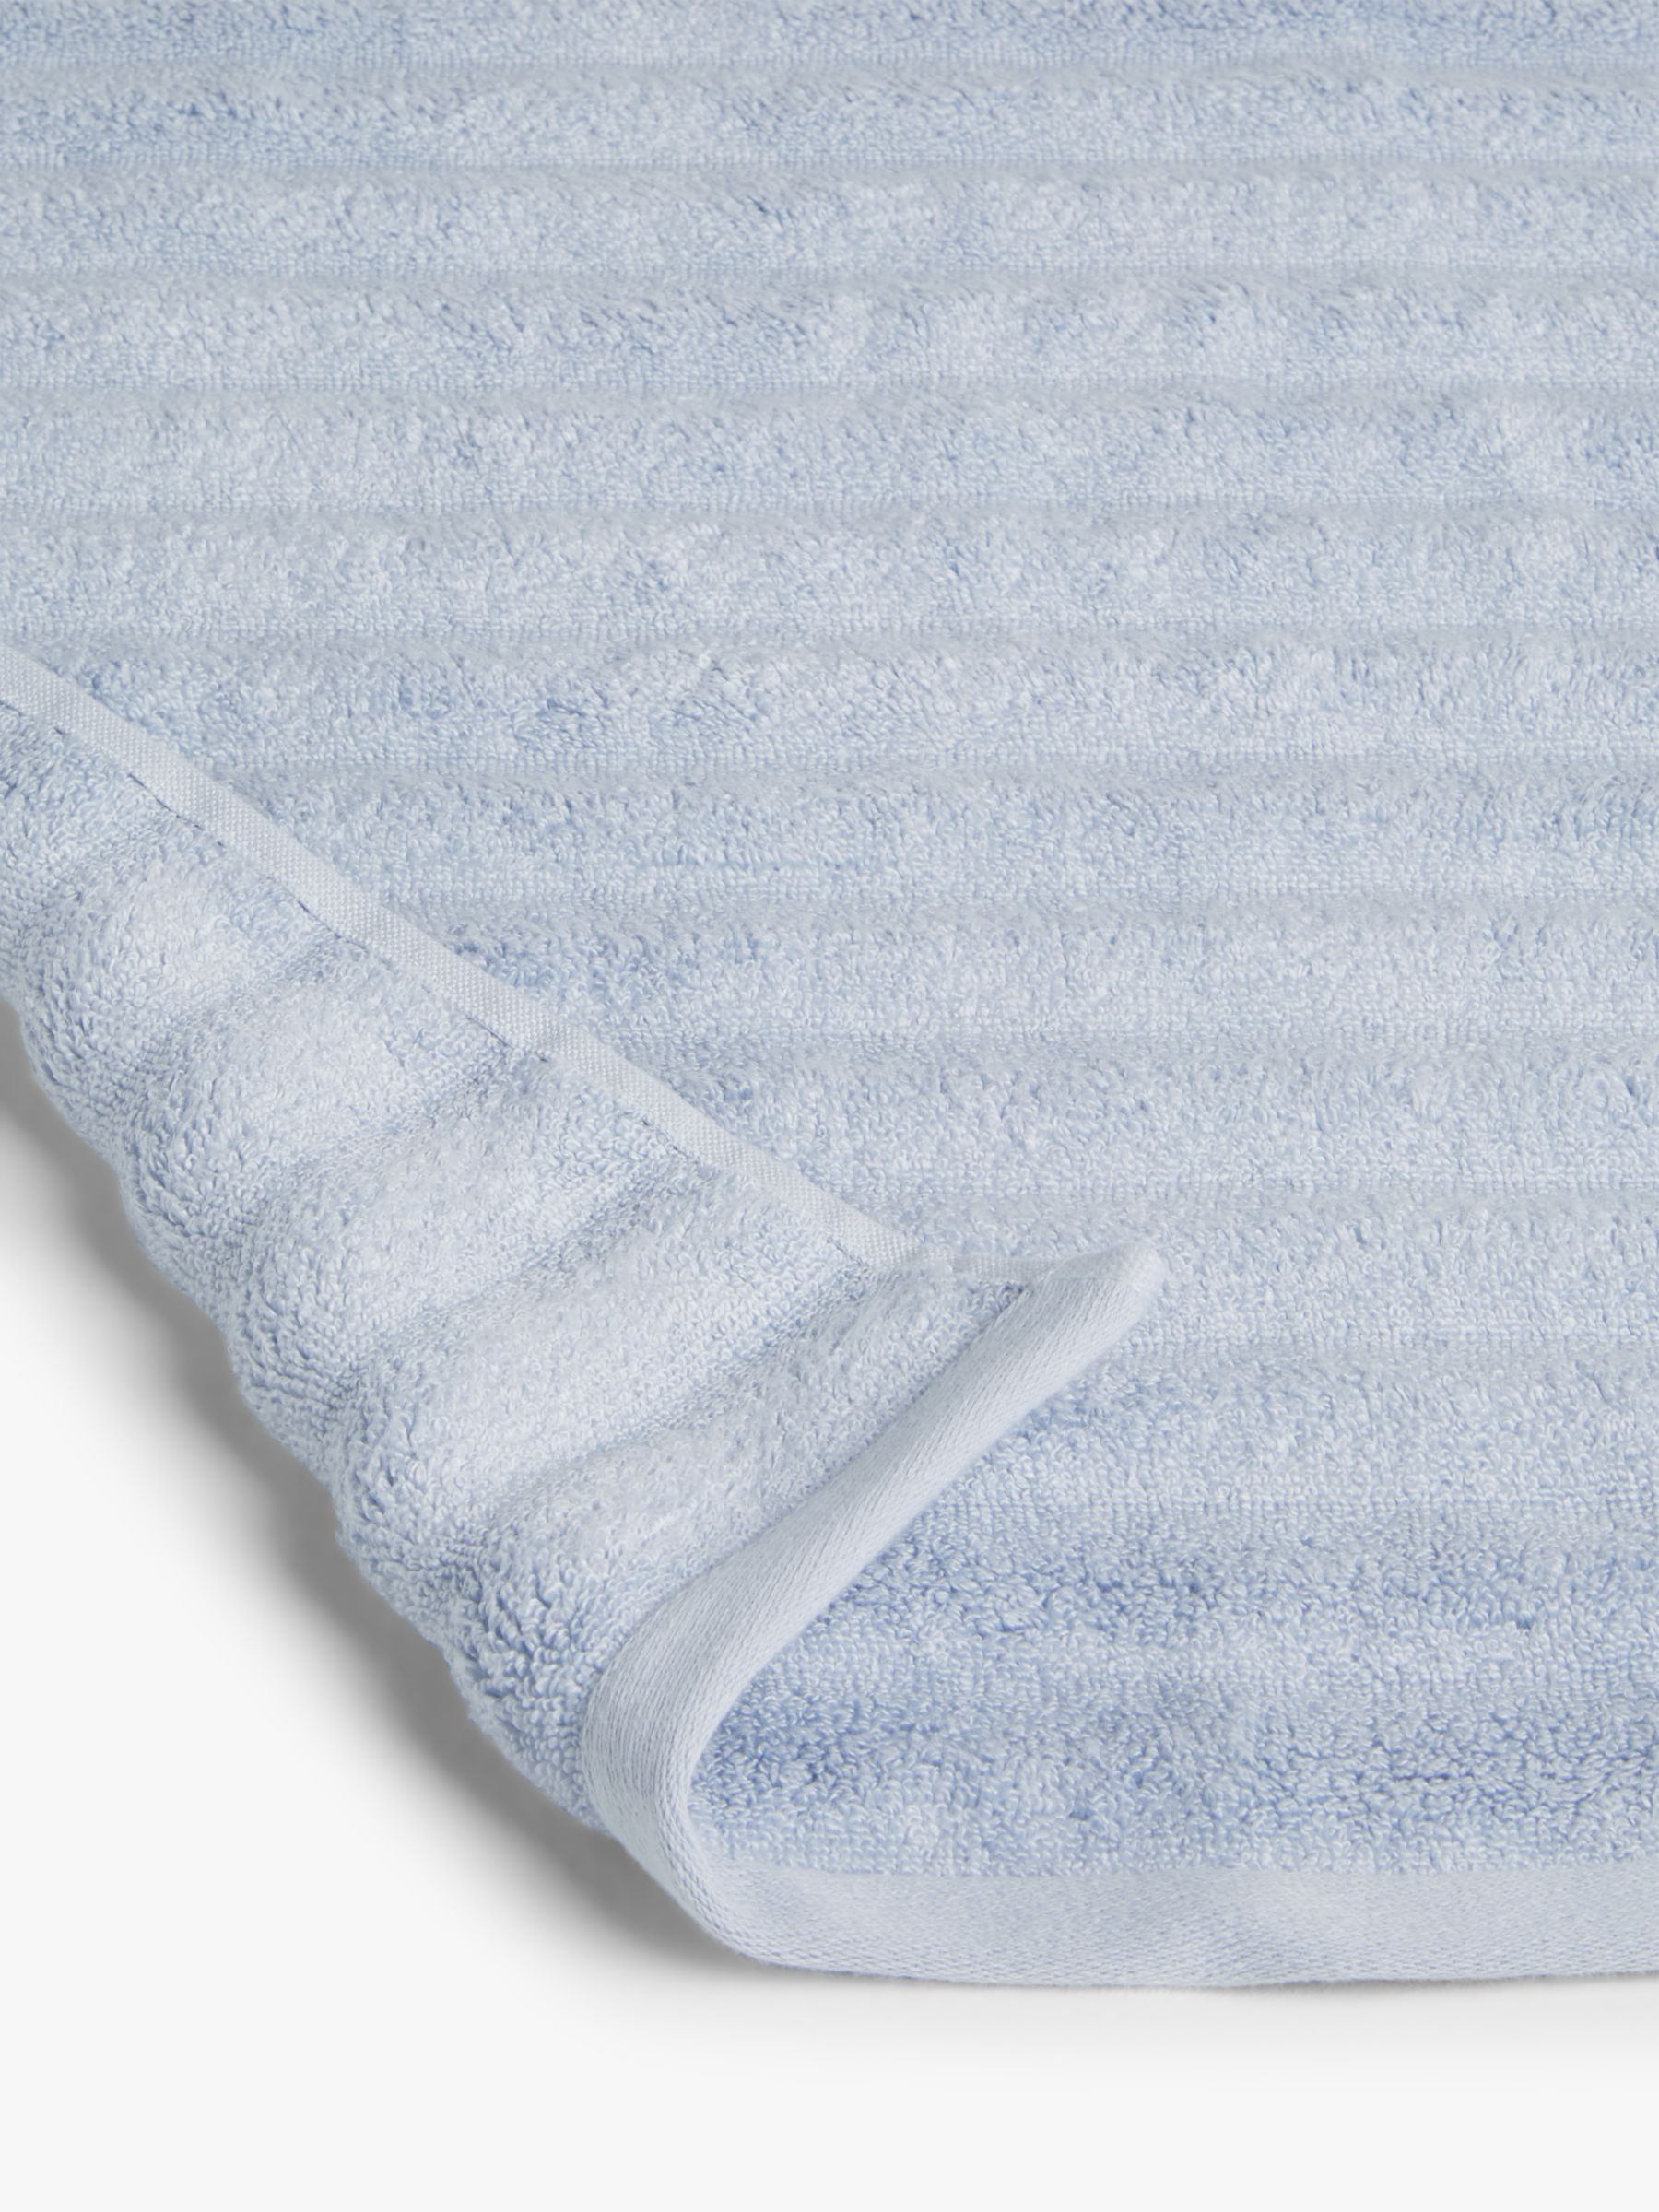 John Lewis Luxury Spa Face Cloth (Set of 2), Pale Pacific